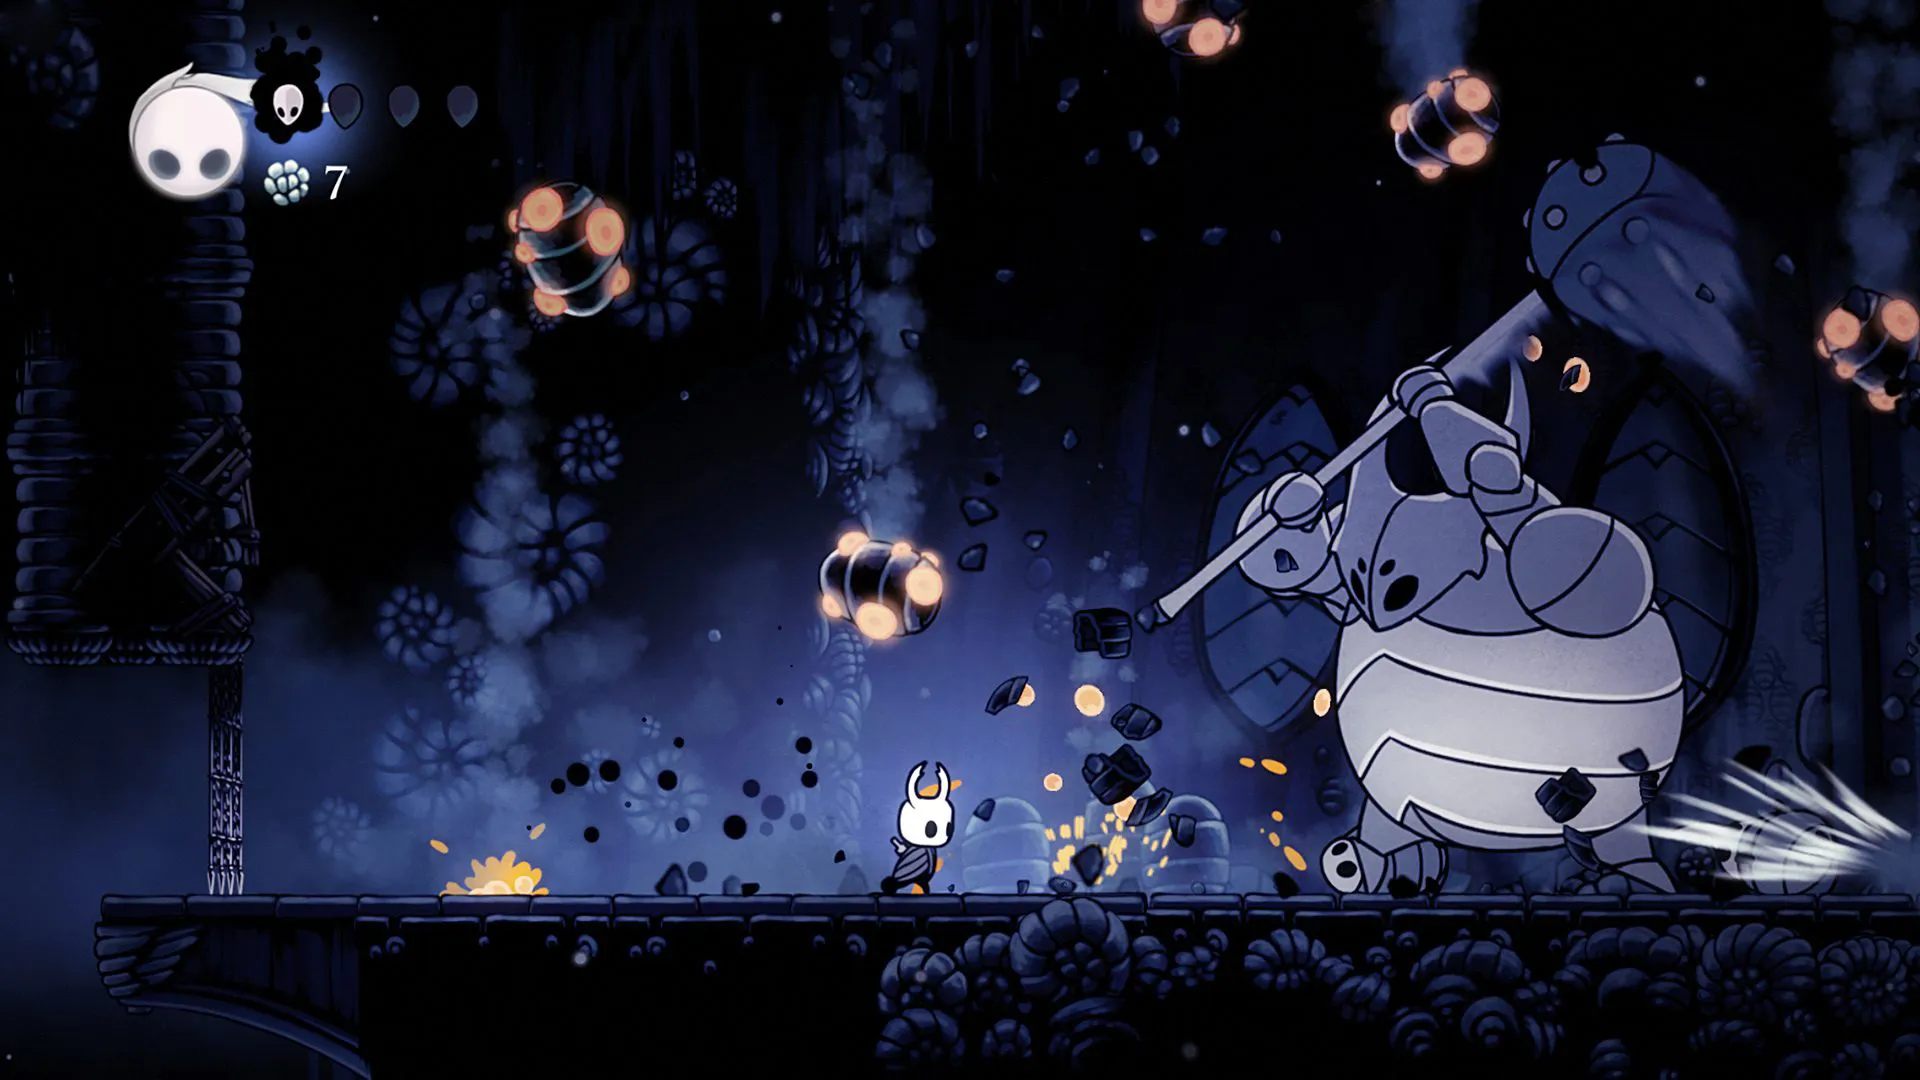 Best switch games: Hollow knight